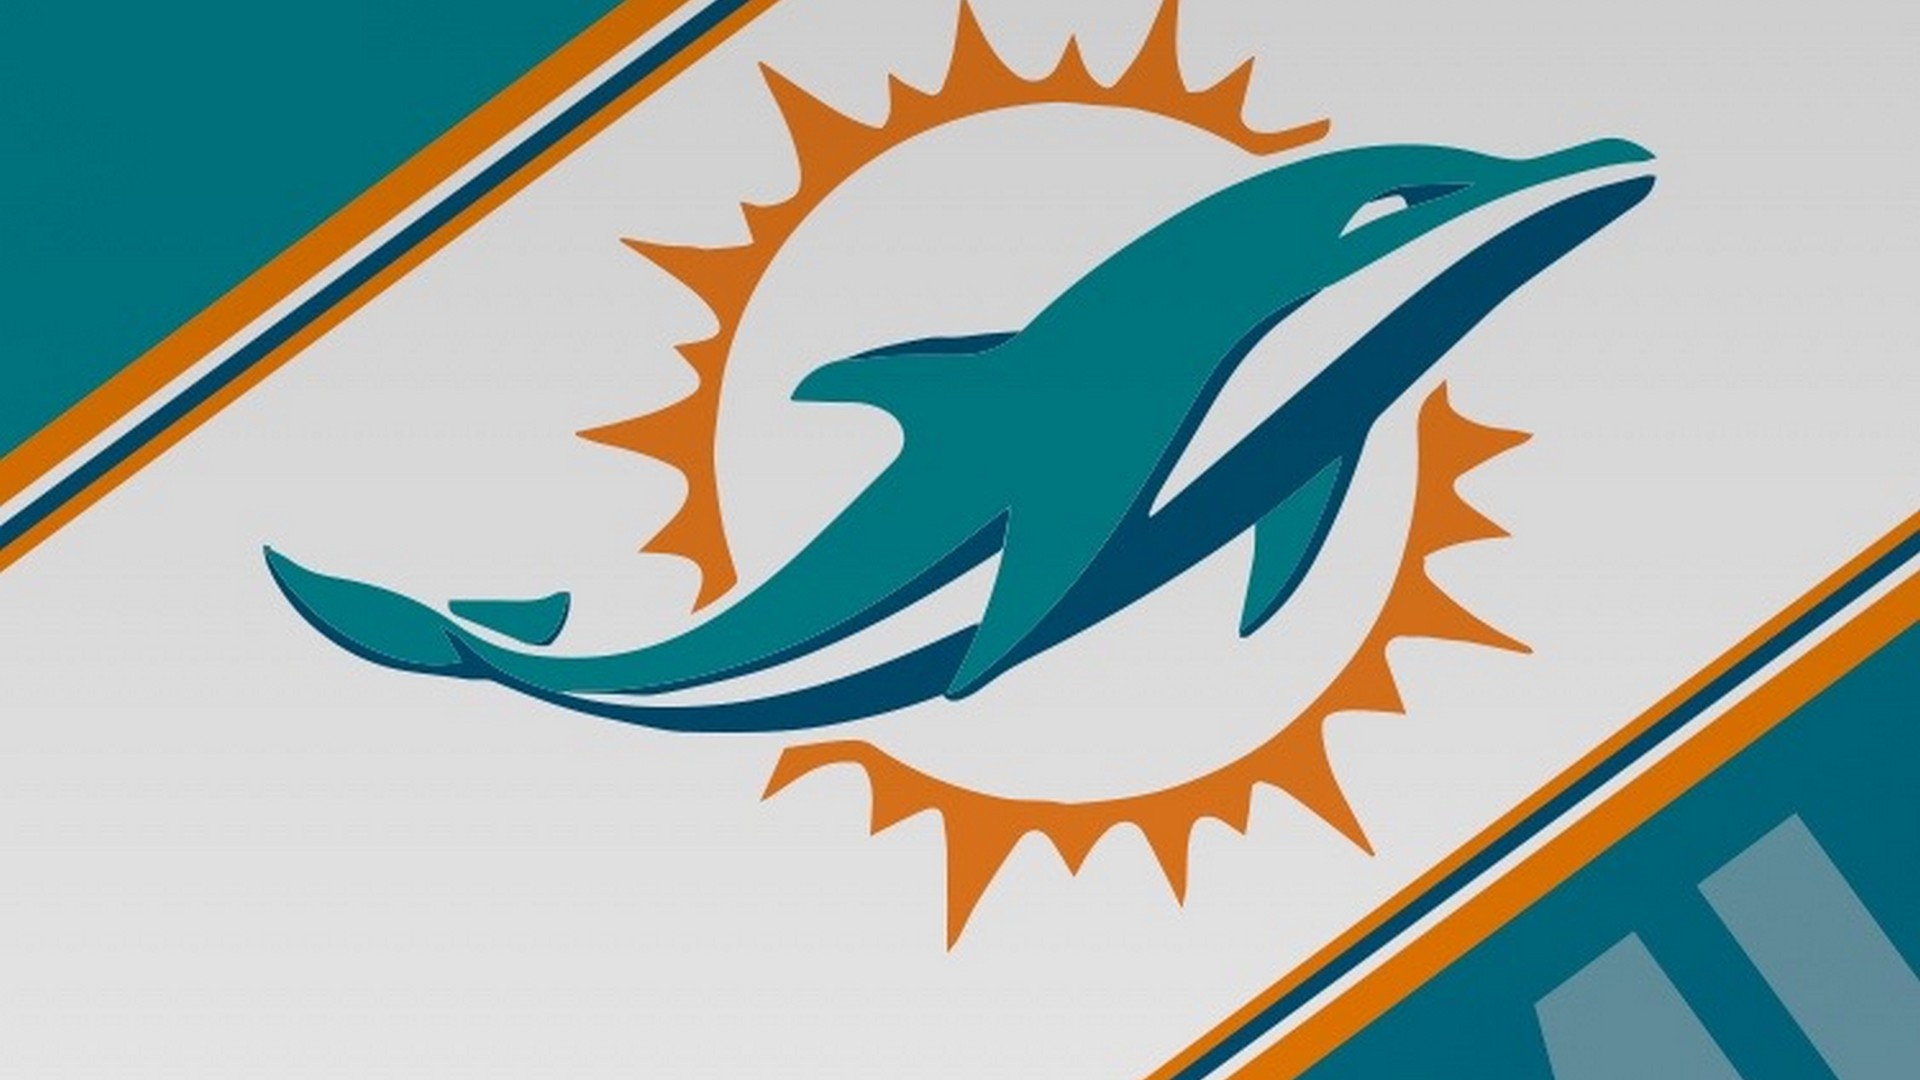 Wallpapers HD Miami Dolphins with resolution 1920x1080 pixel. You can make this wallpaper for your Mac or Windows Desktop Background, iPhone, Android or Tablet and another Smartphone device